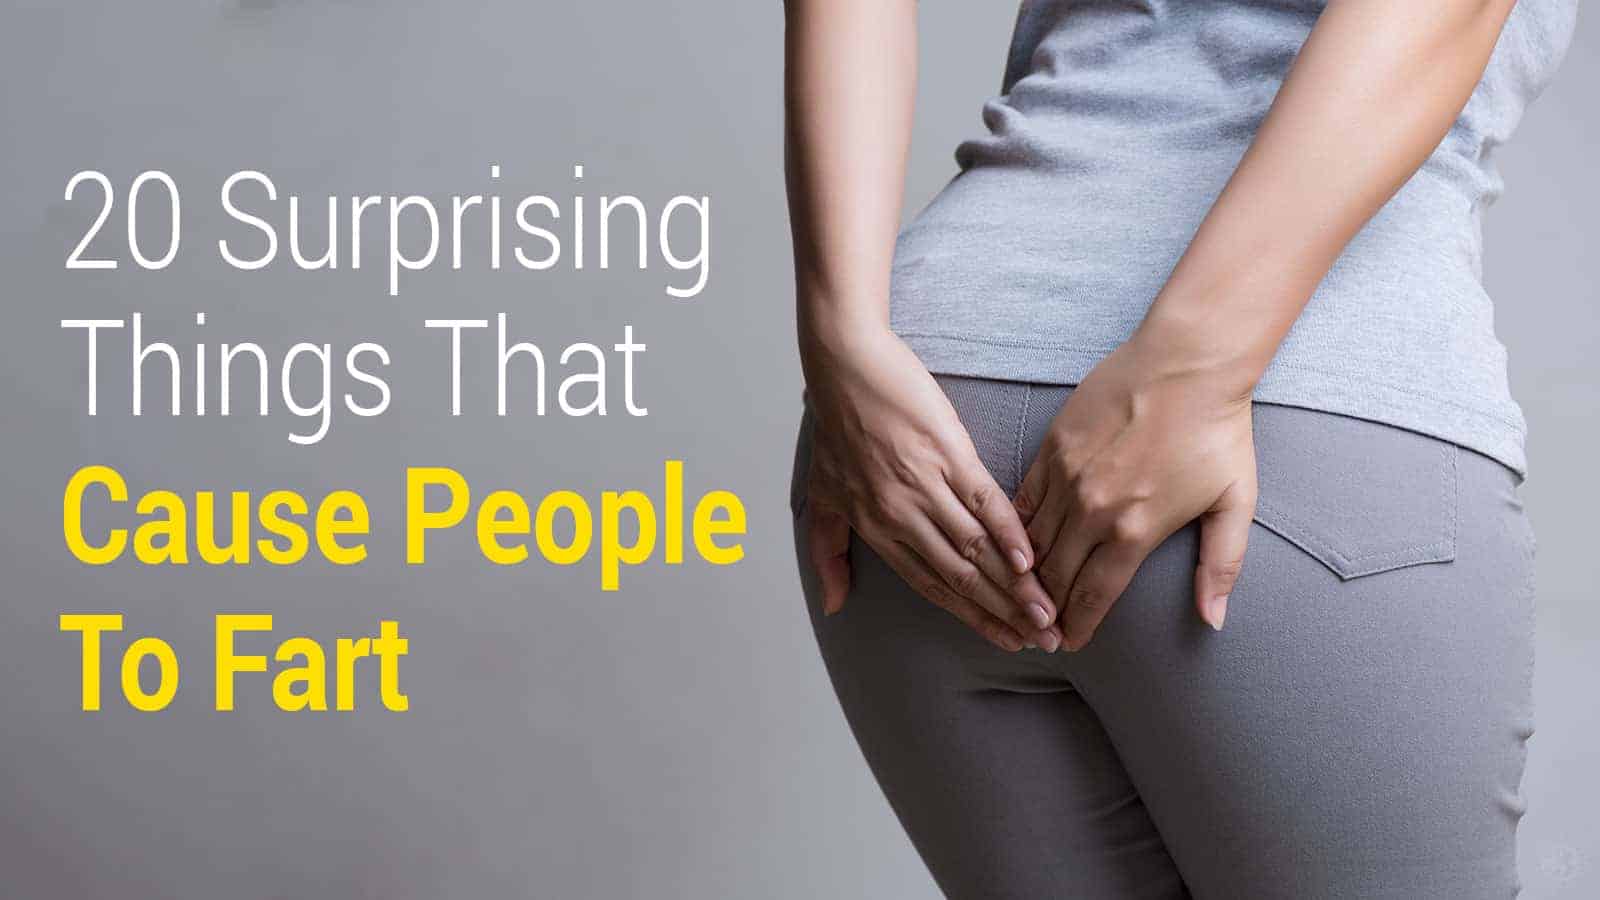 20 Surprising Things That Cause People To Fart